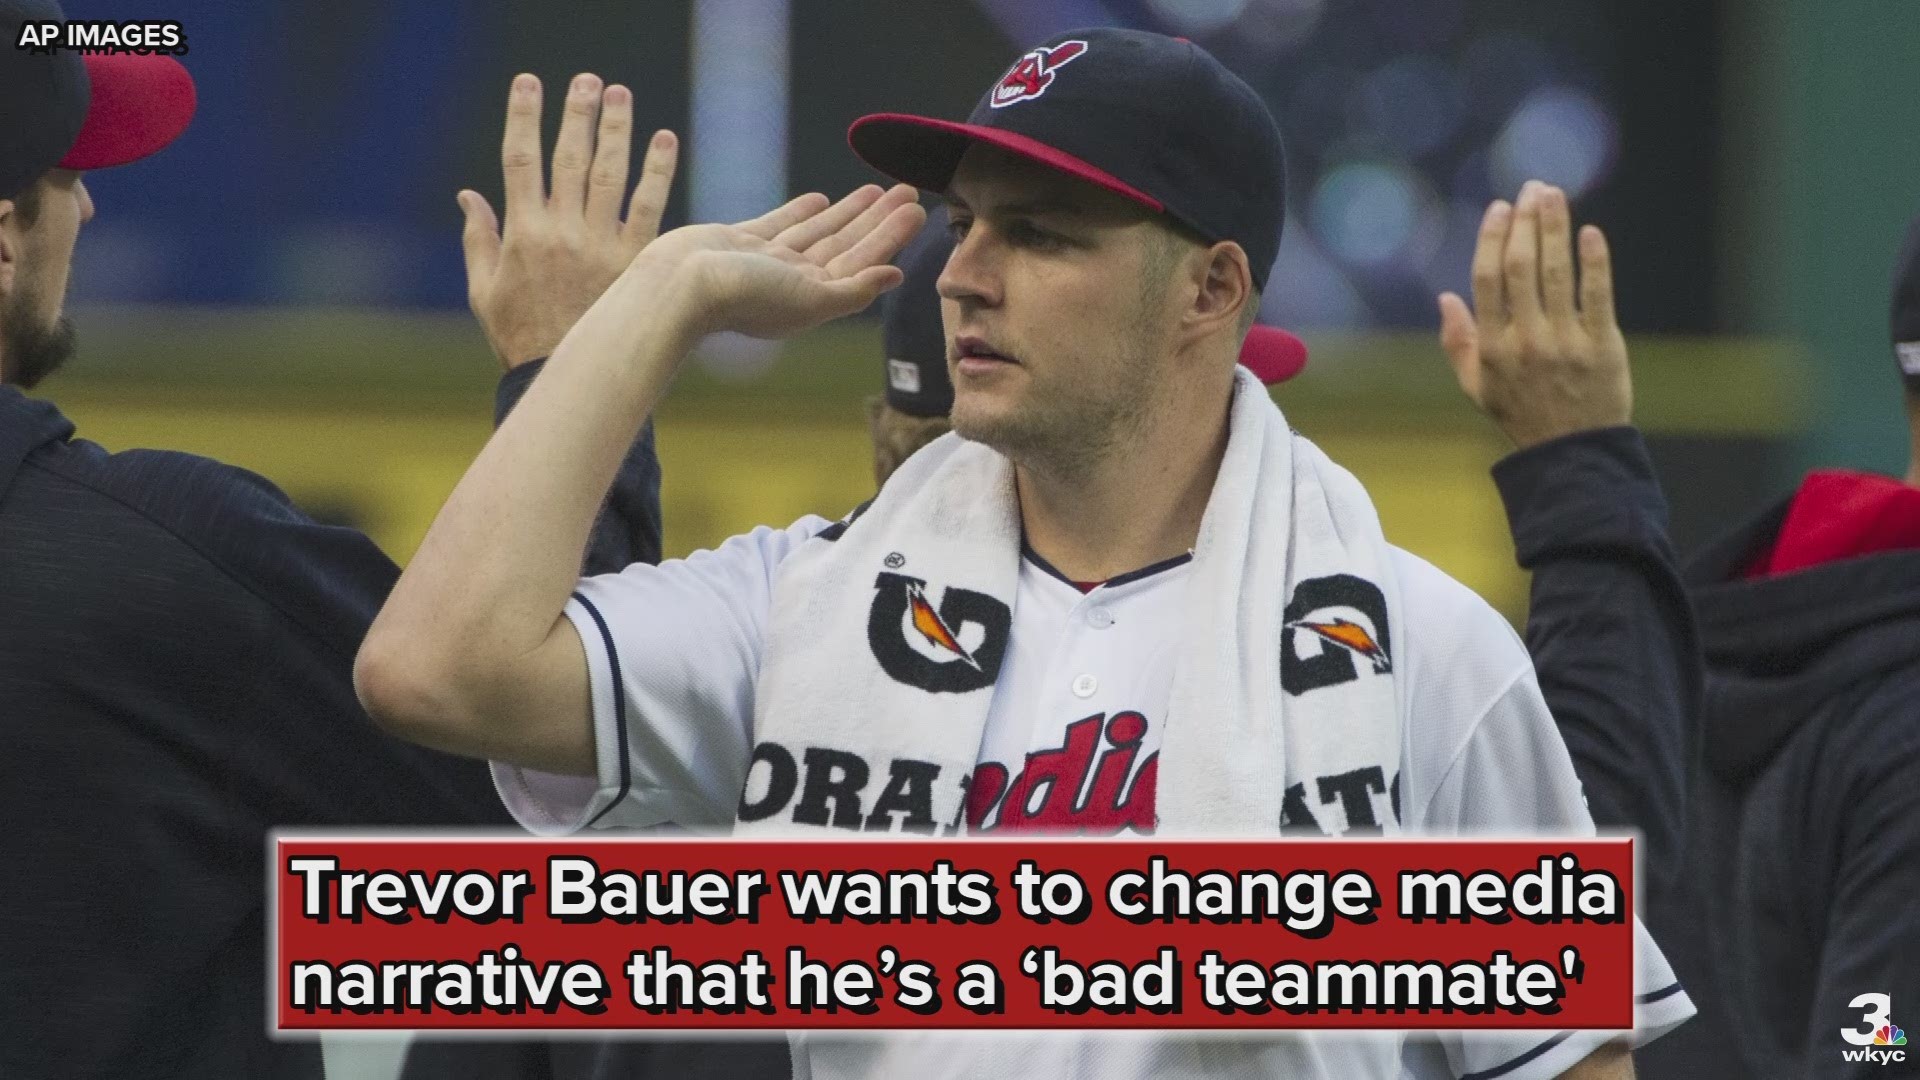 Cleveland Indians starting pitcher Trevor Bauer wants to change the media narrative that he’s a ‘bad teammate.’